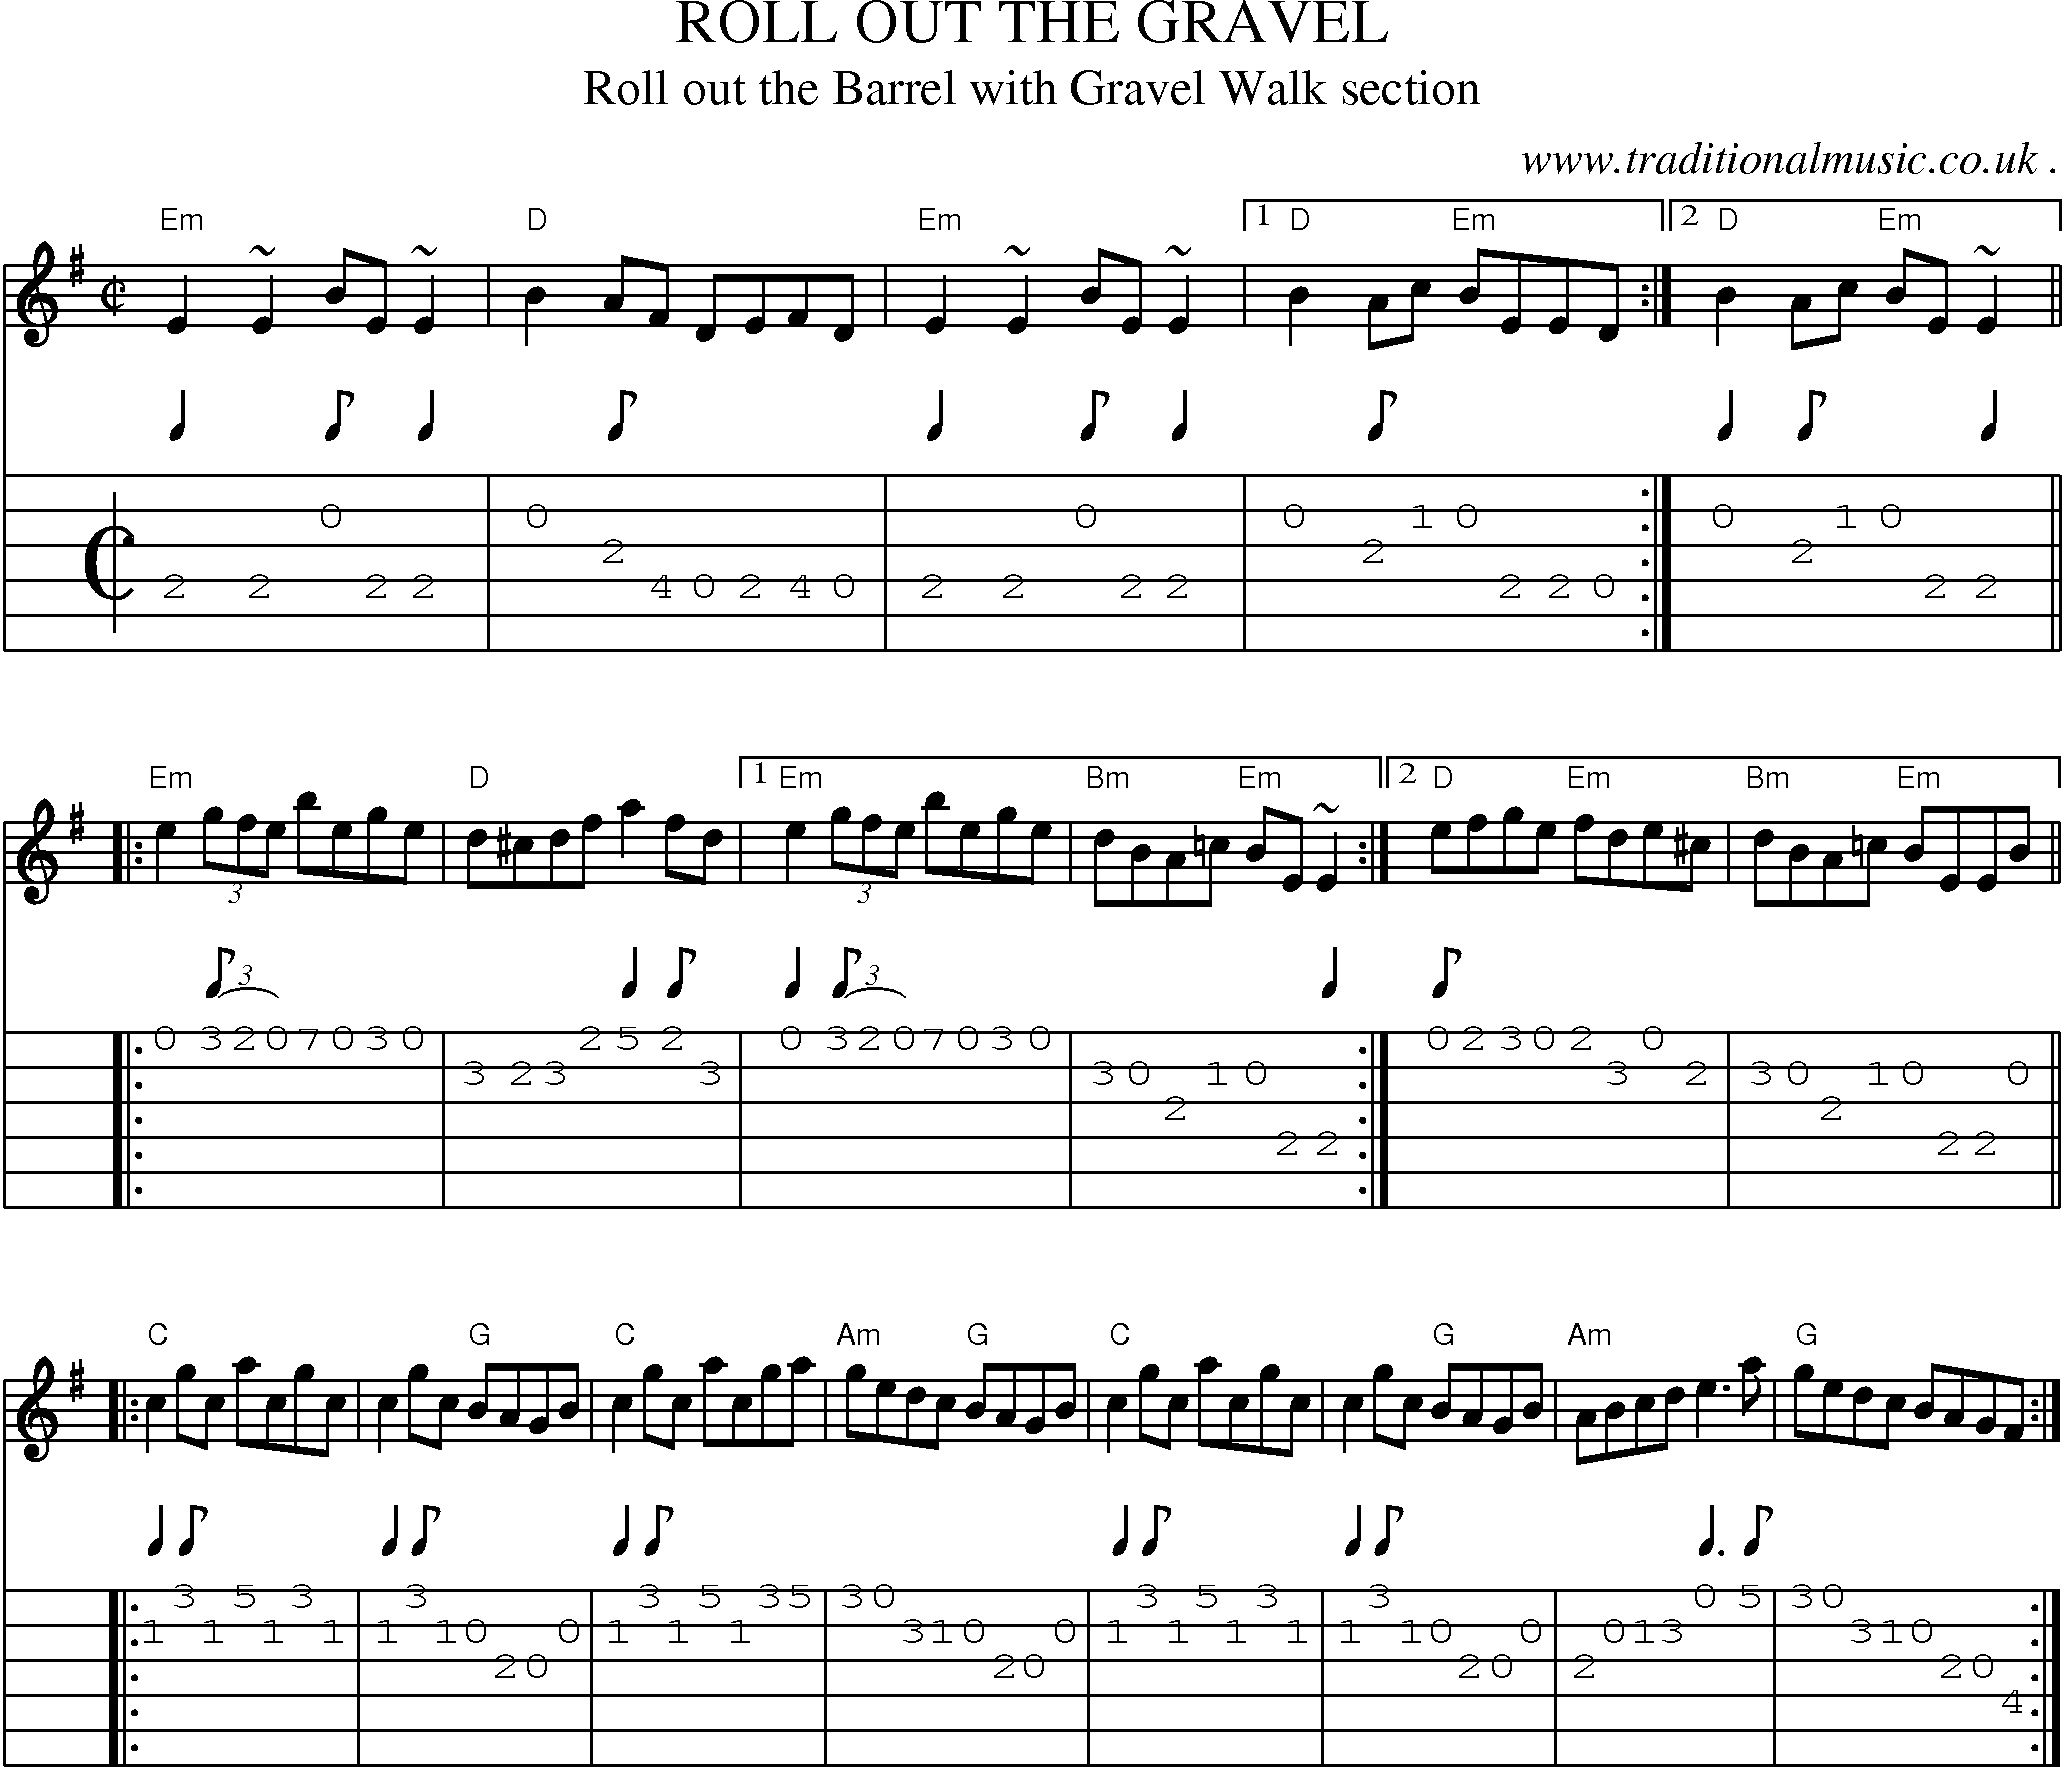 Music Score and Guitar Tabs for Roll Out The Gravel